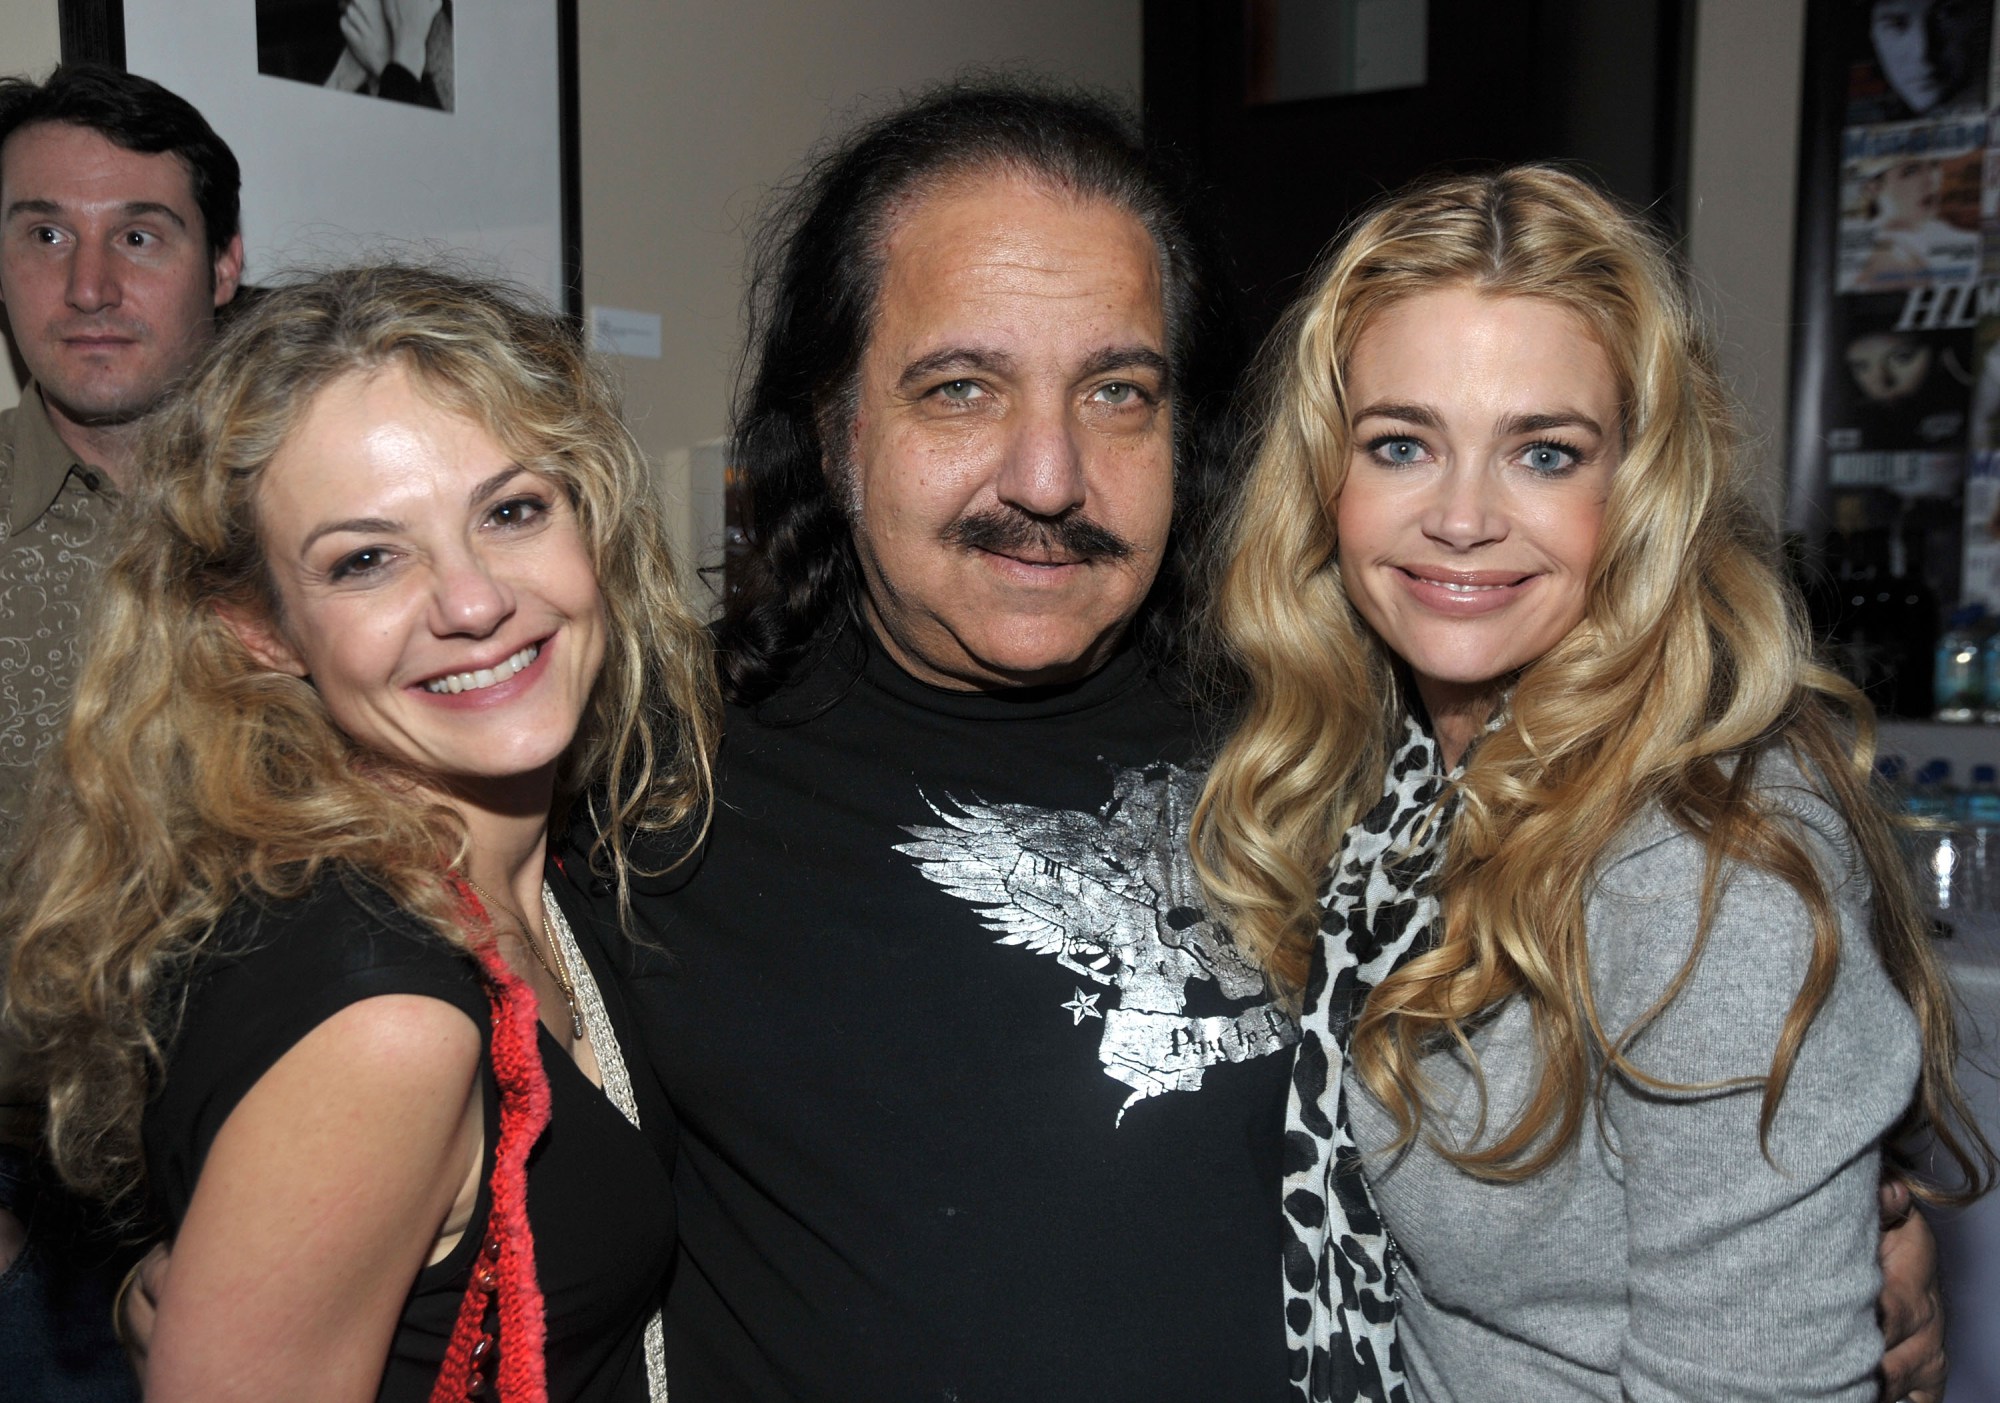 In late January 2013 Ron Jeremy suffered an aneurysm near his heart that almost killed him, and kept him hospitalized for weeks. It was international news and fans from different countries cheered for him to return to his health. Later he spoofed Miley Cyrus' Wreckingball, and the video to his song cover went viral.